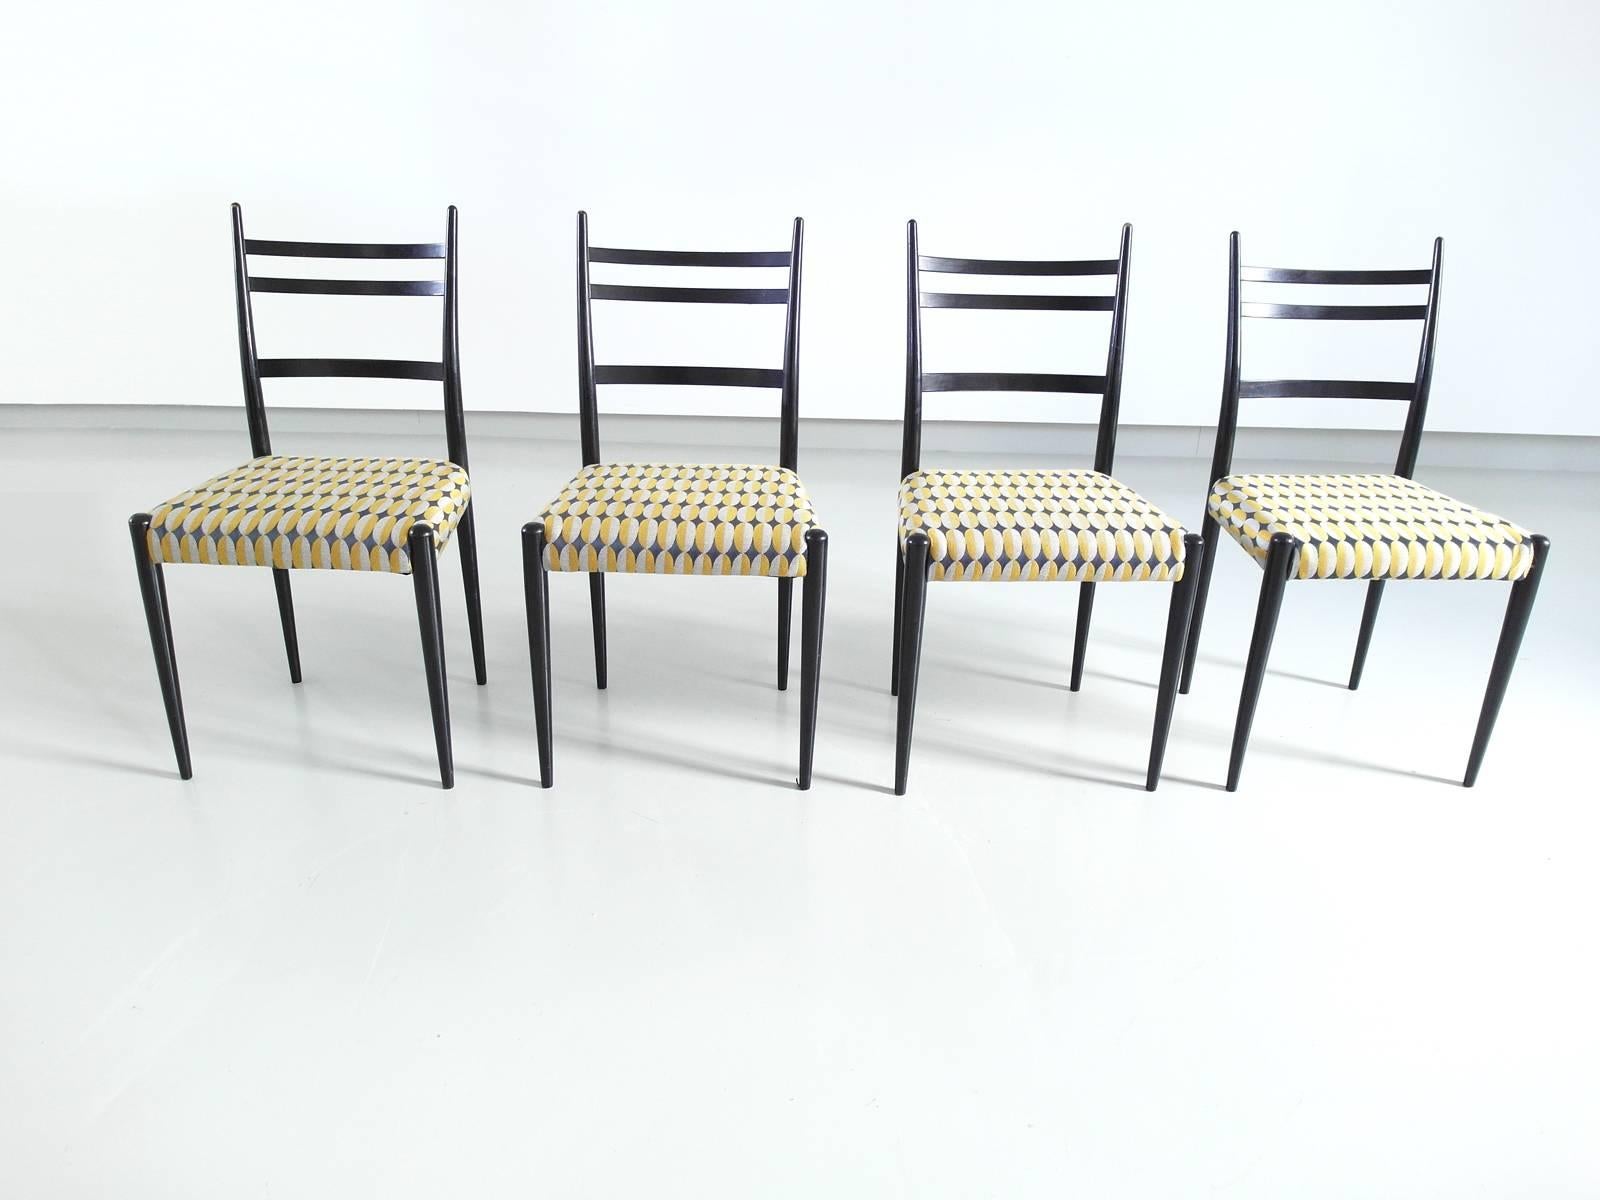 Very nice set of four Mid-Century Modern Italian dining chairs in the manner of Gio Ponti's Legerra chair. The chairs feature a sleek and elegant black wooden frame and are reupholstered with a great high quality graphic fabric in yellow and grey.